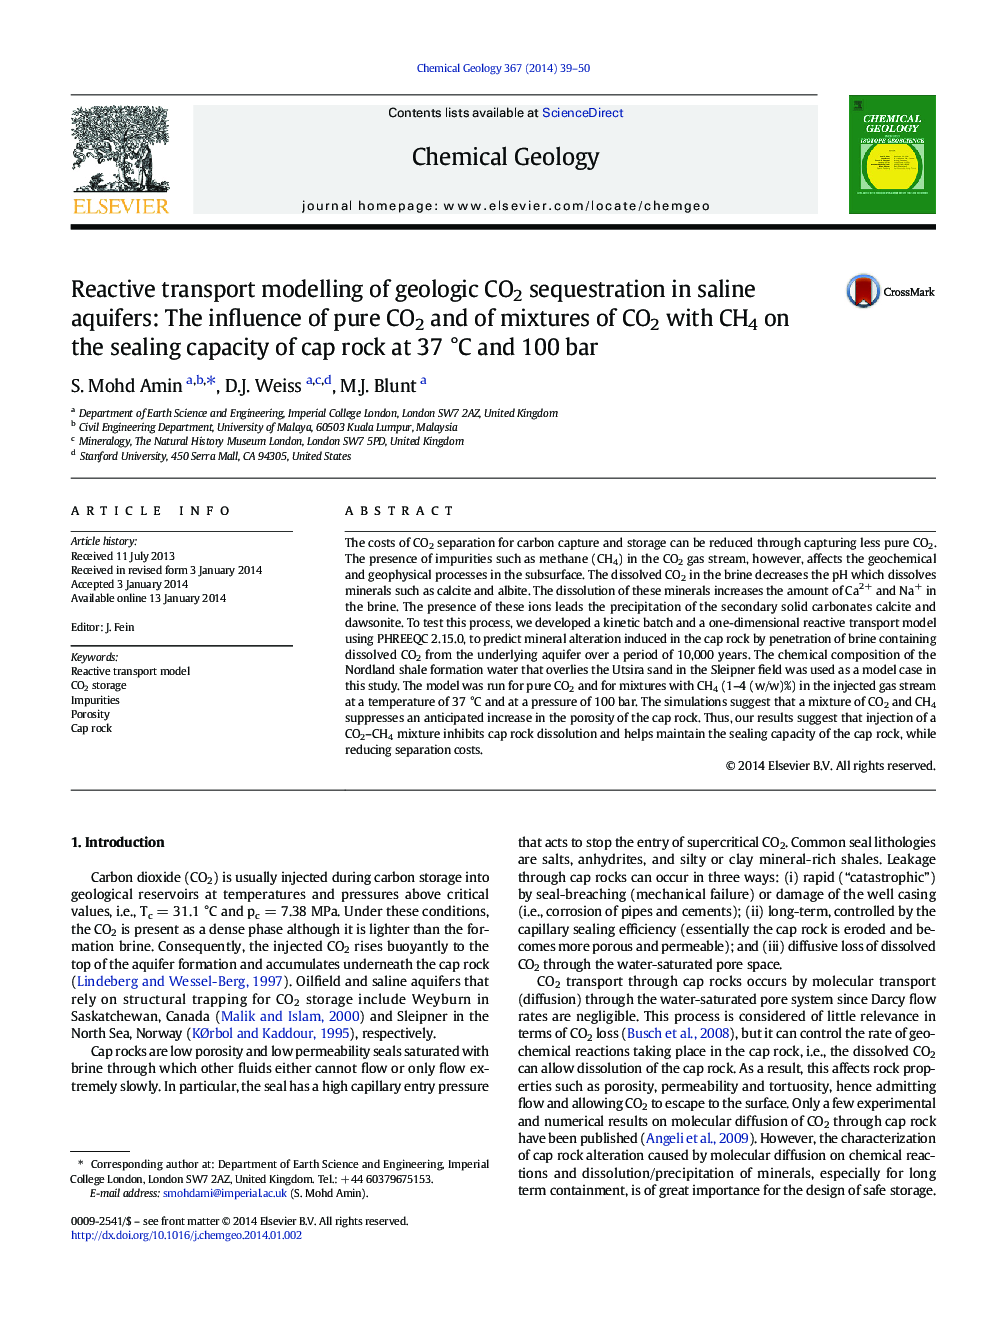 Reactive transport modelling of geologic CO2 sequestration in saline aquifers: The influence of pure CO2 and of mixtures of CO2 with CH4 on the sealing capacity of cap rock at 37 °C and 100 bar